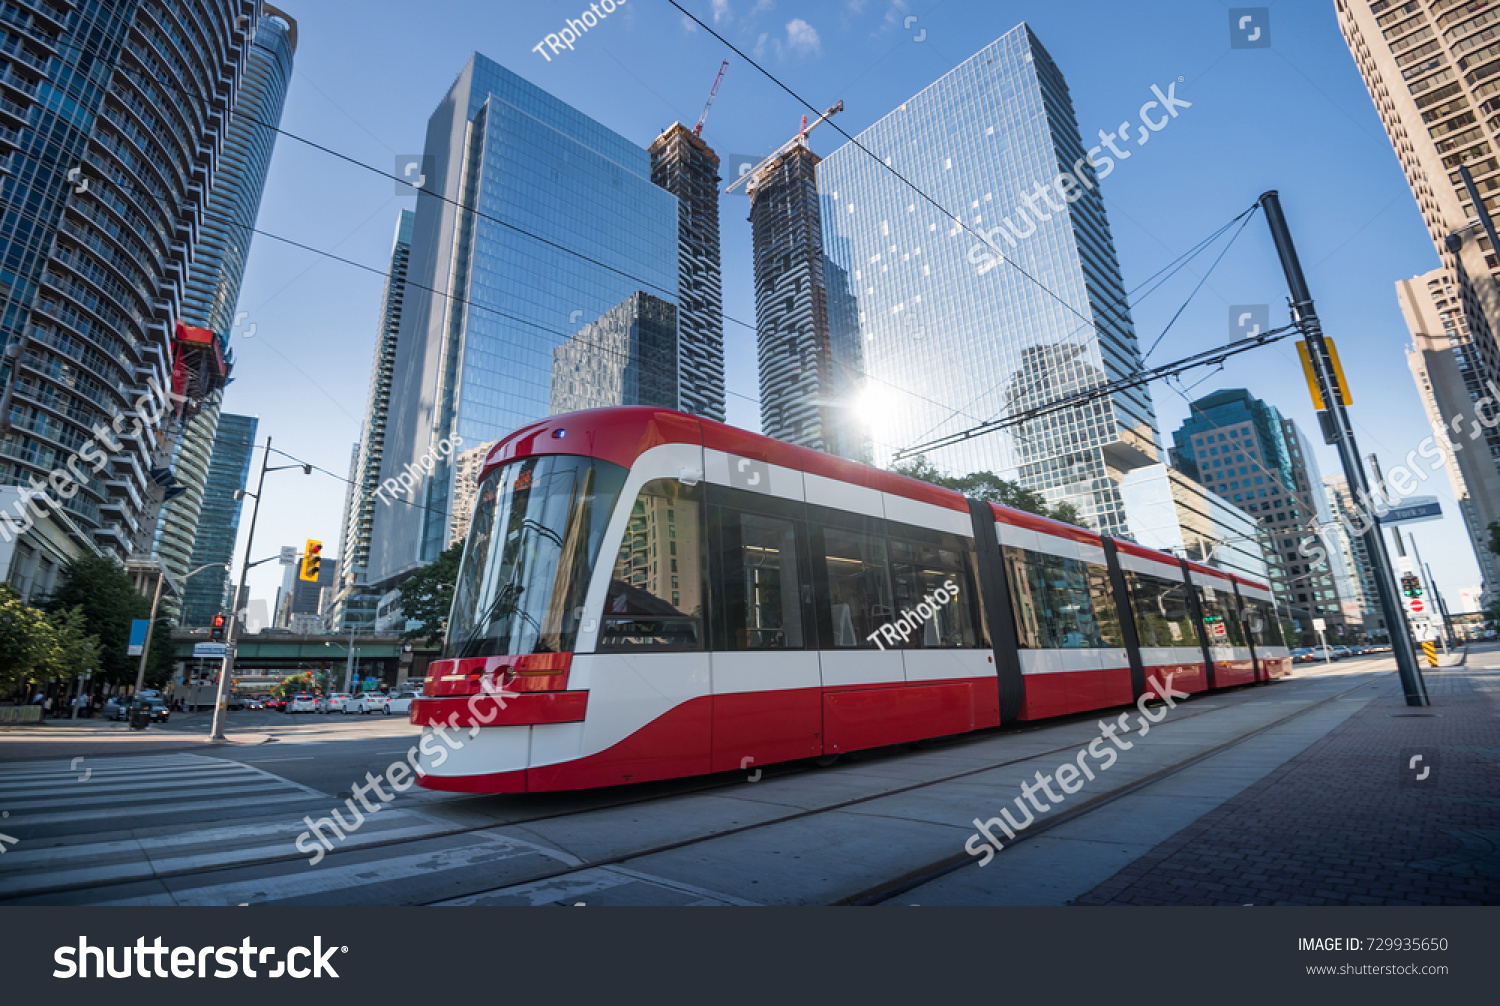 Street Cars during in Toronto city, Canada #729935650